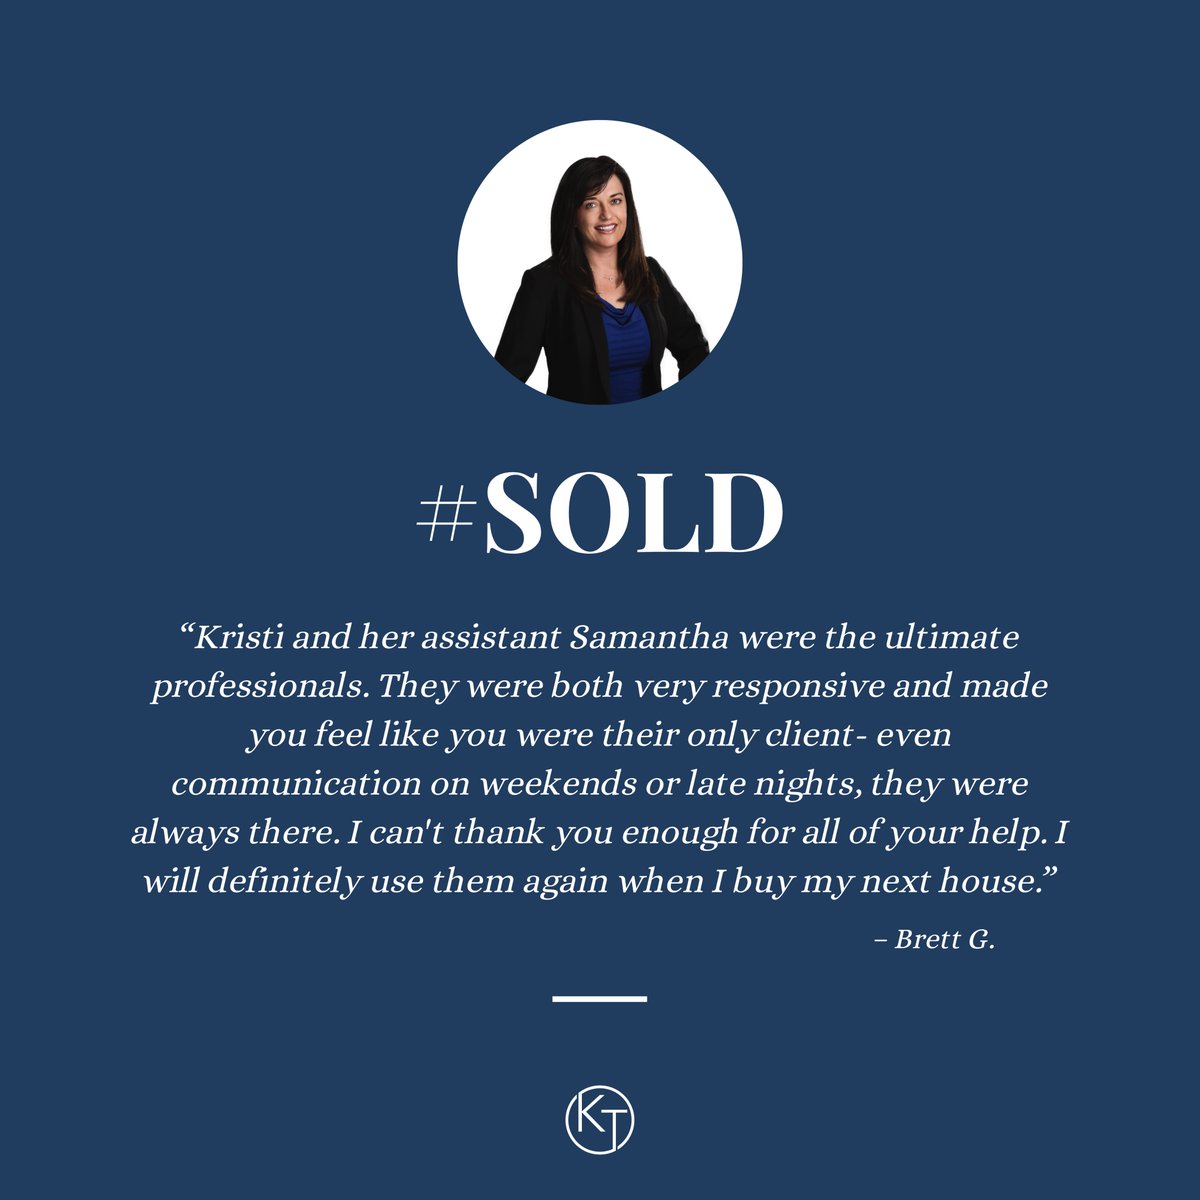 𝑪𝒍𝒊𝒆𝒏𝒕 𝑻𝒆𝒔𝒕𝒊𝒎𝒐𝒏𝒊𝒂𝒍 
Kristi Taylor
(707) 495-3333
Kristi.Taylor@cbrealty.com
CalRE#01303101
#sold #review #testimonial #seller #thankyou  #lovewhatyoudo #sonomacountyrealestate #santarosa #justsold #listingagent #clienttestimonial #clientlove #clientreview